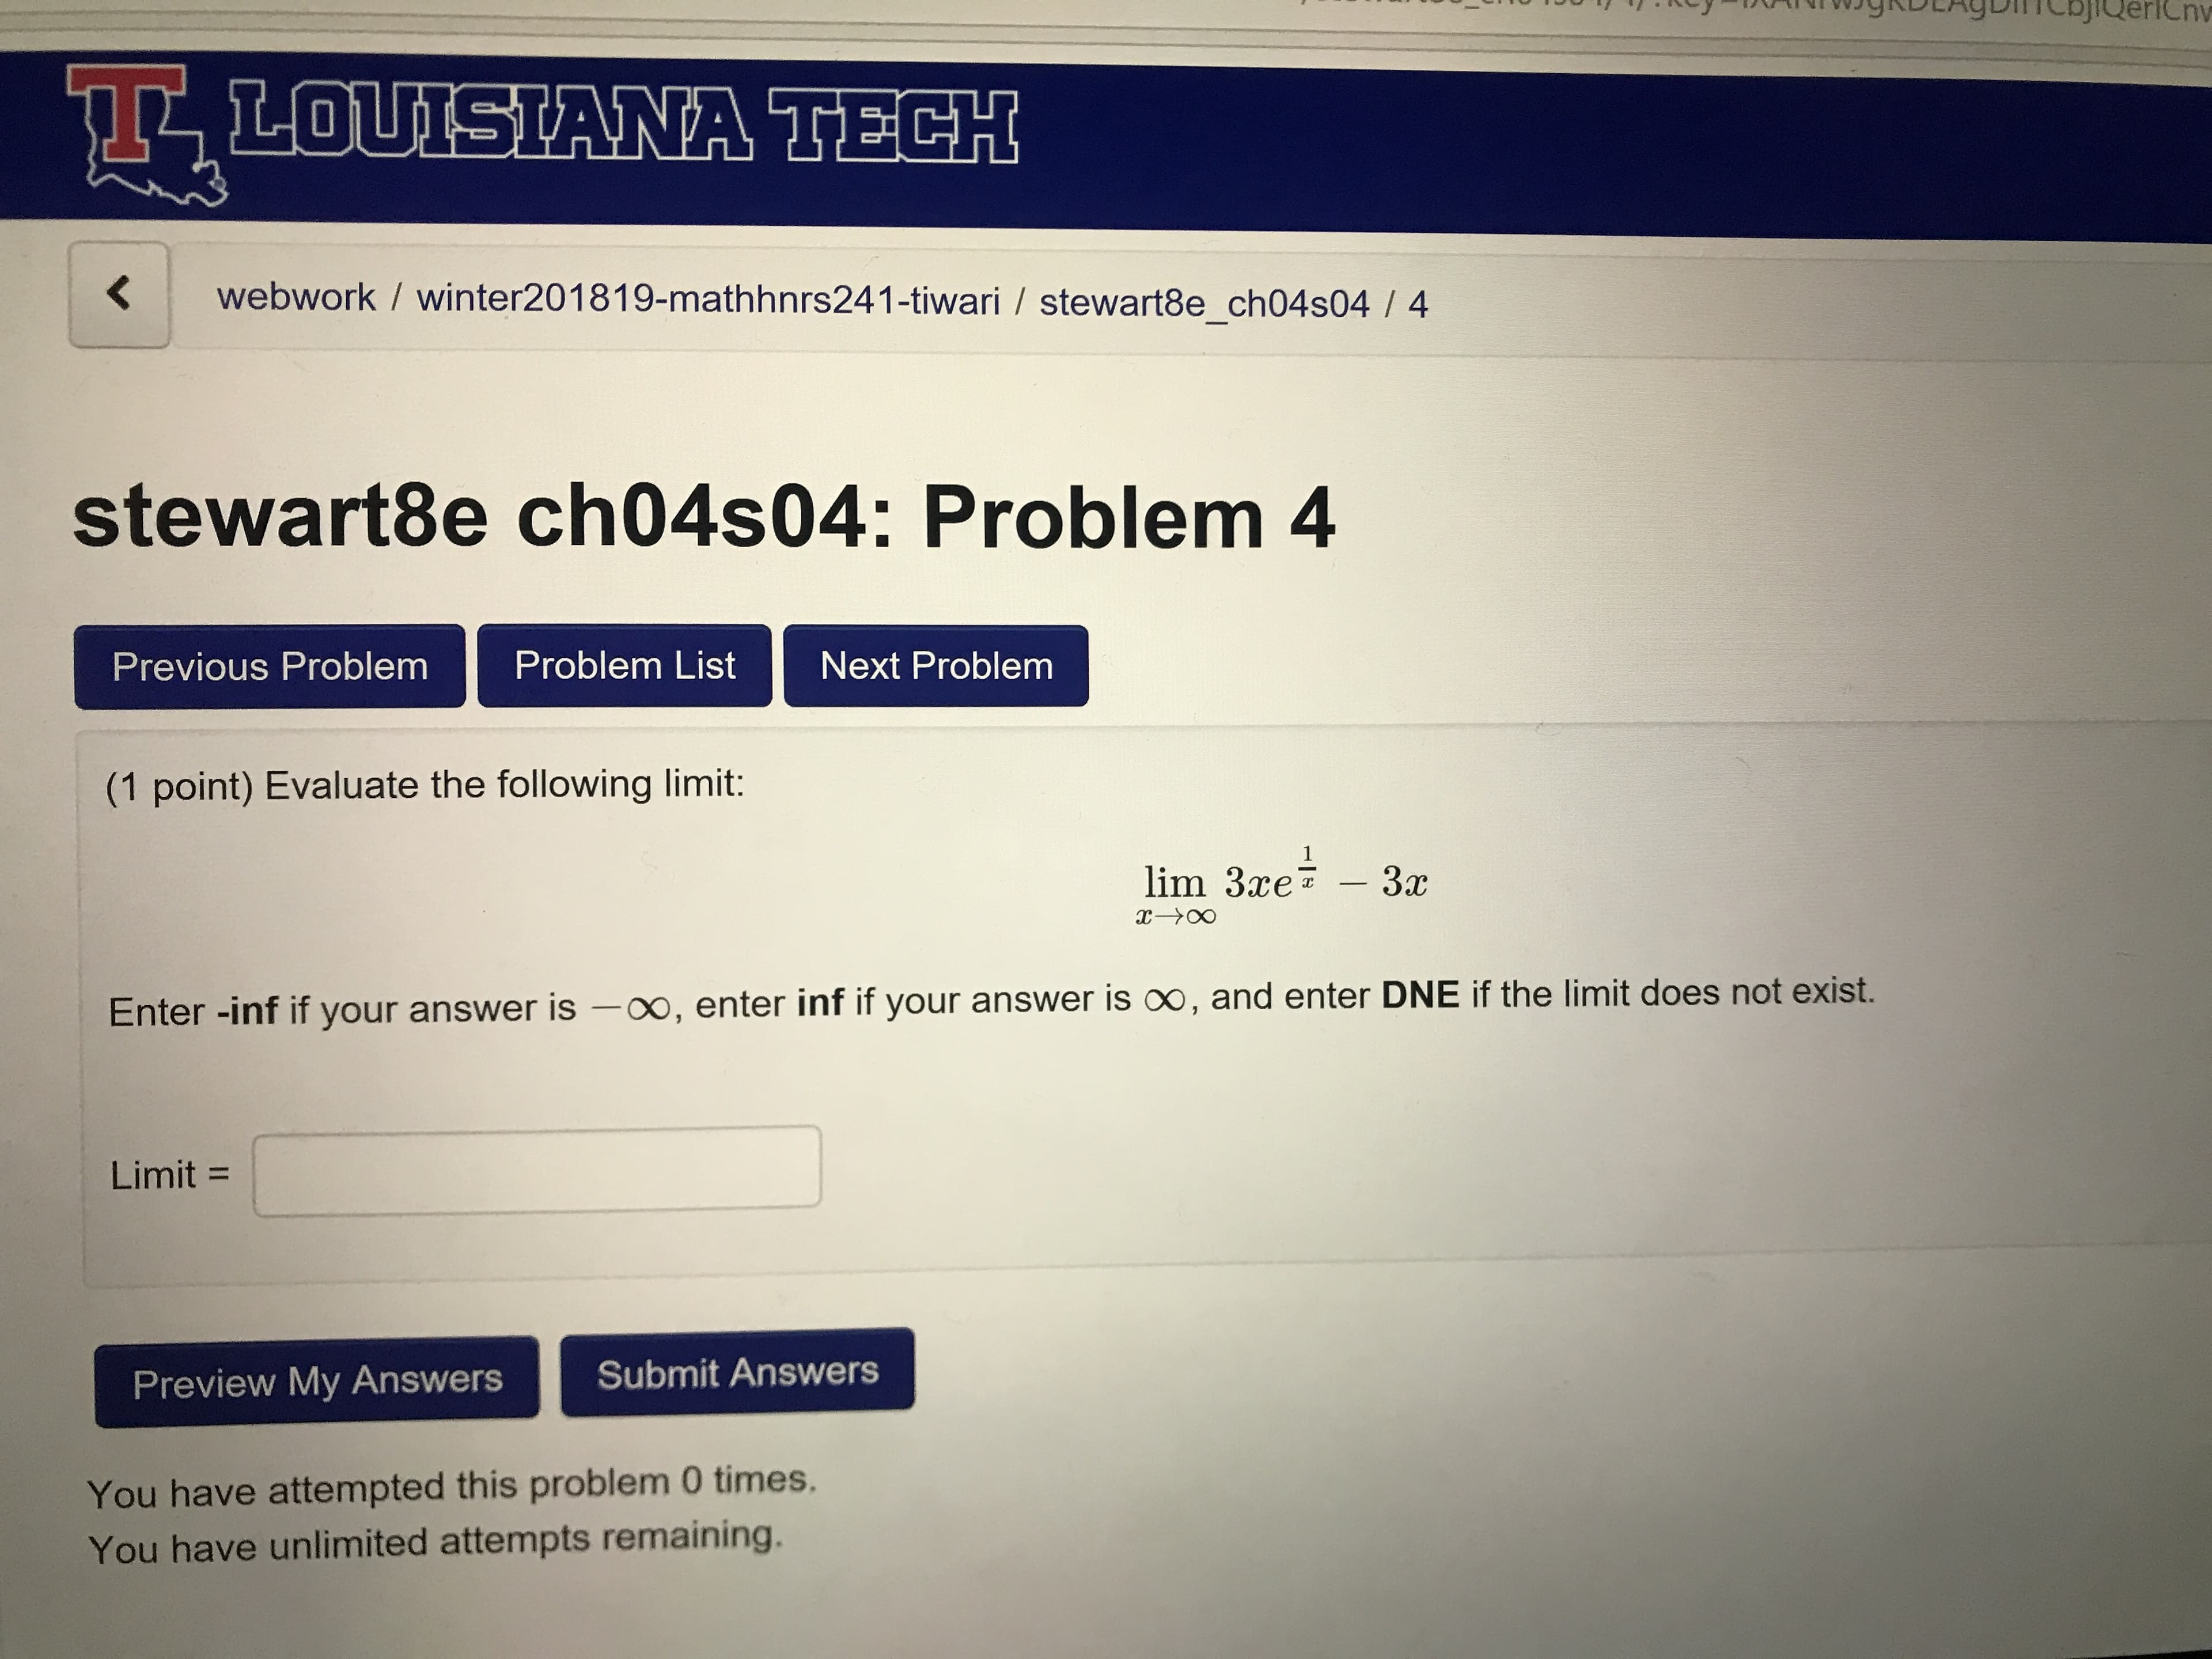 LOUISTANA TECH
<webwork / winter201819-mathhnrs241-tiwari / stewart8e_ch04s04 / 4
stewart8e ch04s04: Problem 4
Previous Problem Problem ListNext Problem
(1 point) Evaluate the following limit:
lim 3xe? 3c
Enter -inf if your answer is -oo, enter inf if your answer is oo, and enter DNE if the limit does not exist.
Limit =
Preview My Answers Submit Answers
You have attempted this problem 0 times.
You have unlimited attempts remaining.
